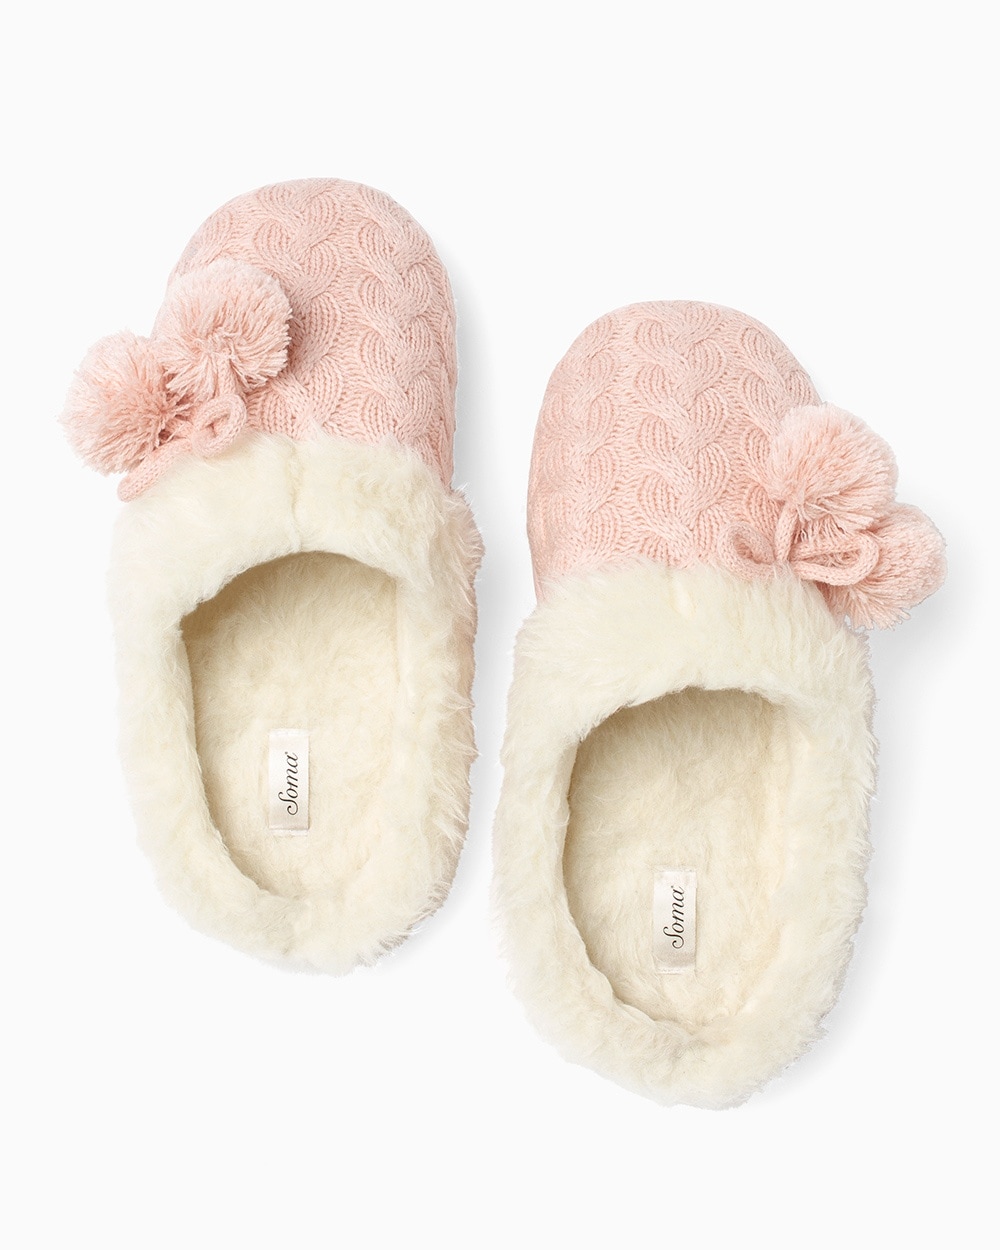 Plush Textured Slippers Vintage Pink